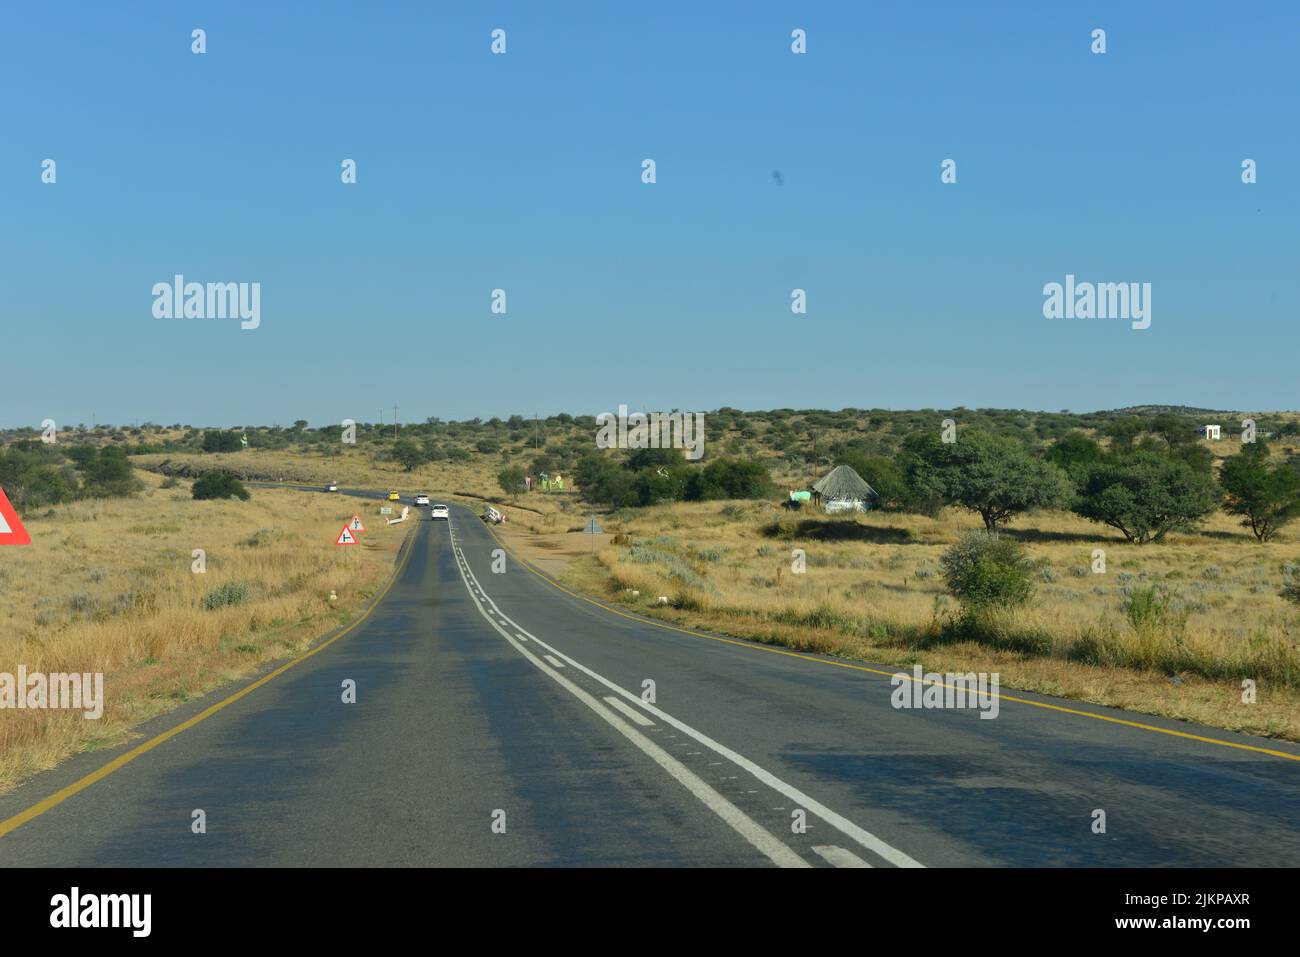 The long rural road with traffic and street signs in Windhoek, Namibia Stock Photo